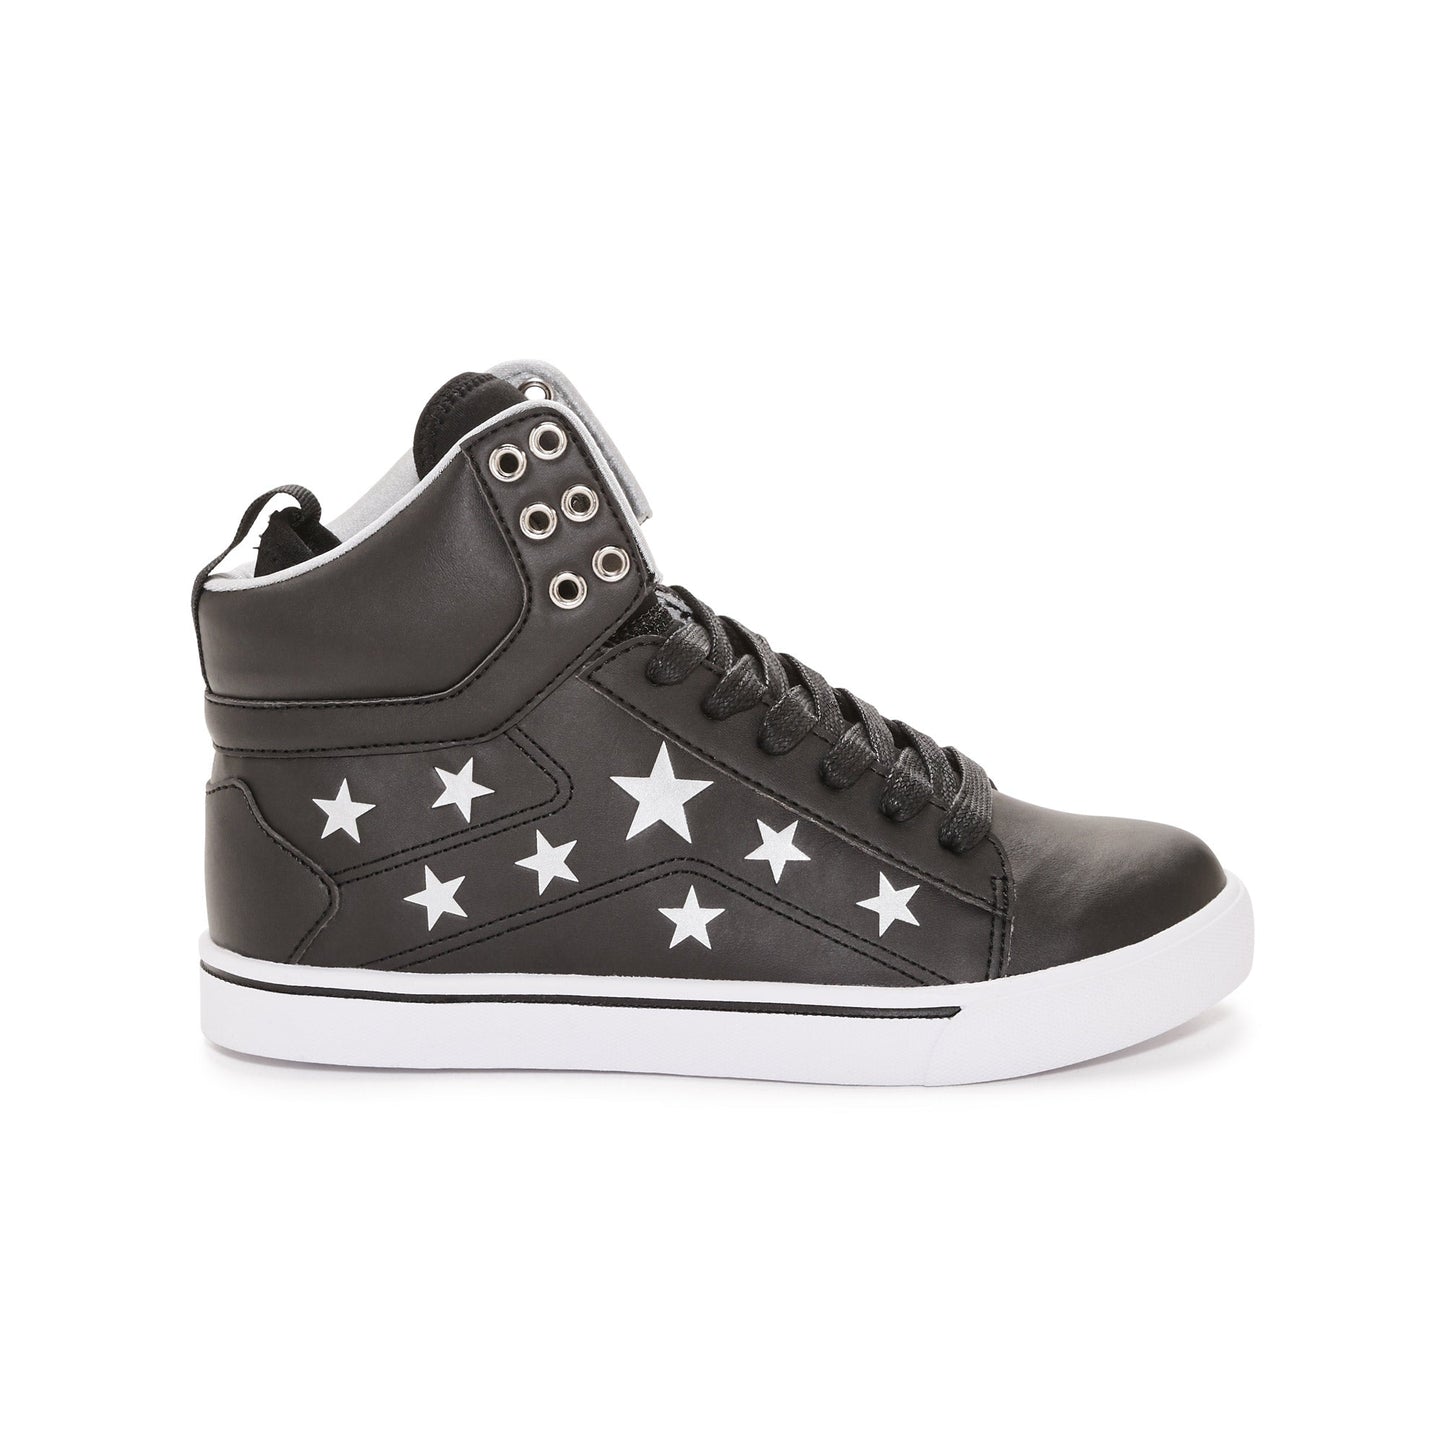 Pastry Pop Tart Star Youth Sneaker in Black/Silver lateral view